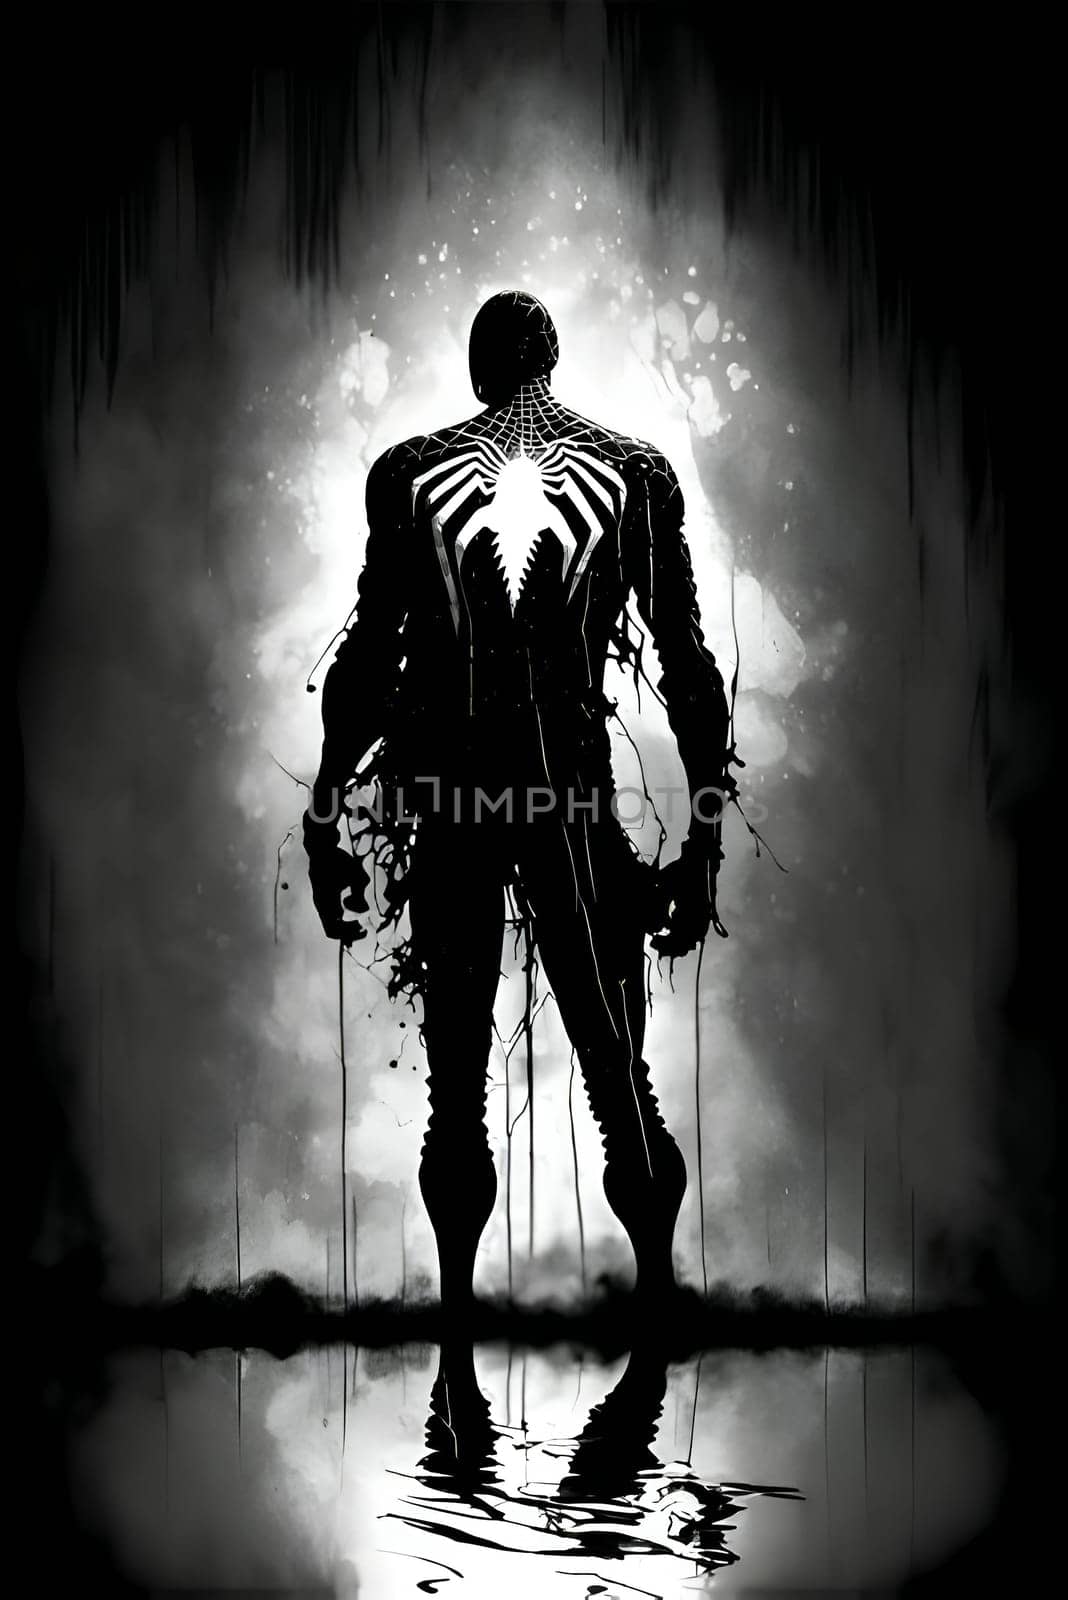 Vector illustration of a spider man in black silhouette against a clean white background, capturing graceful forms.